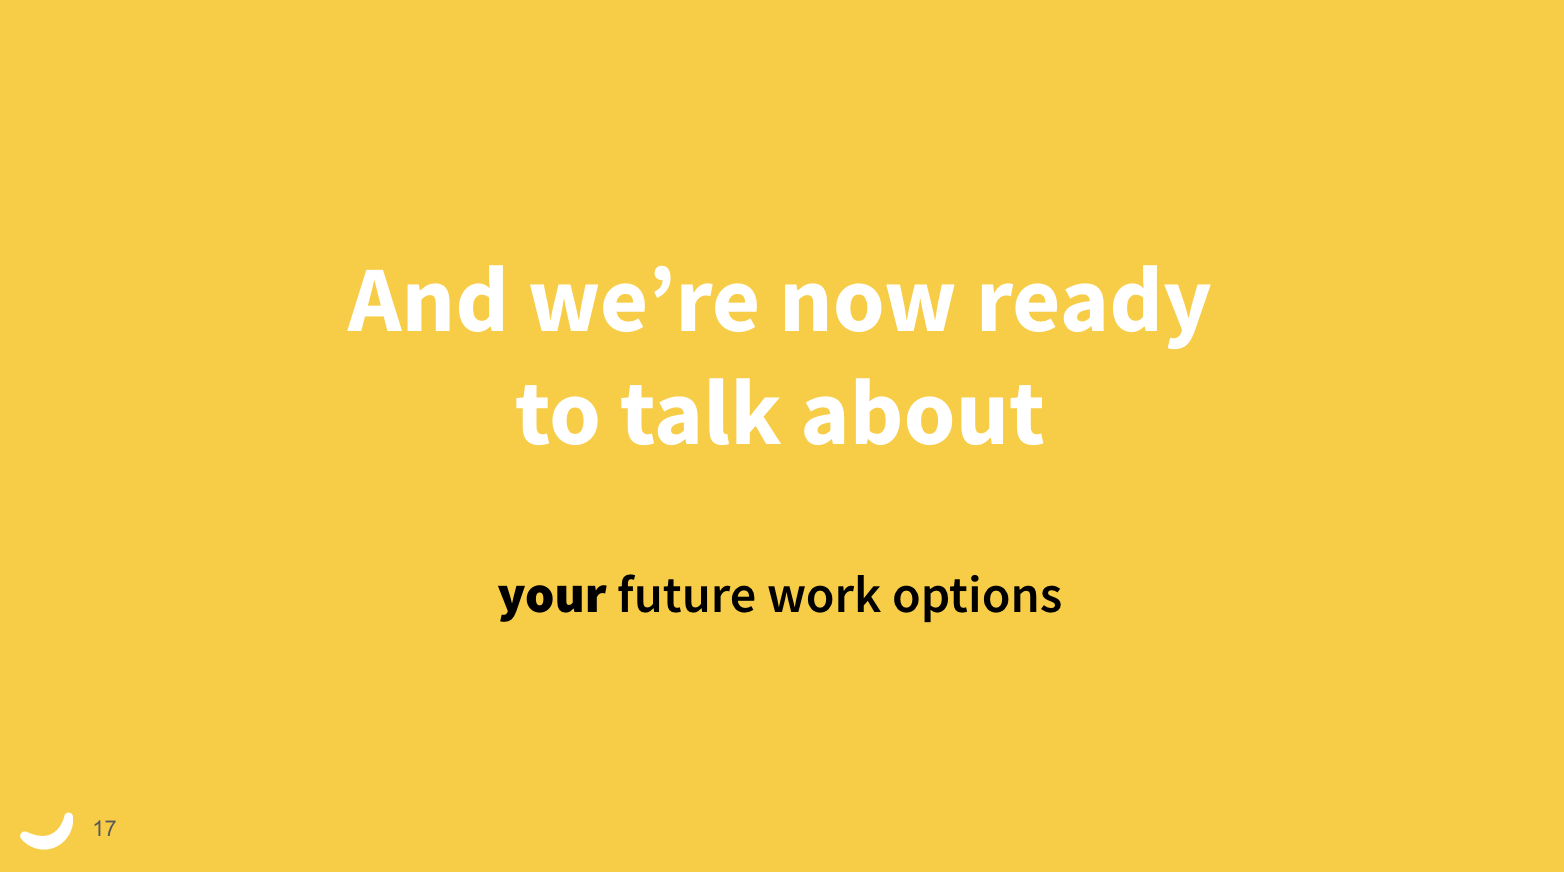 Powerpoint slide that says: 'And we're now ready to talk about your future work options'